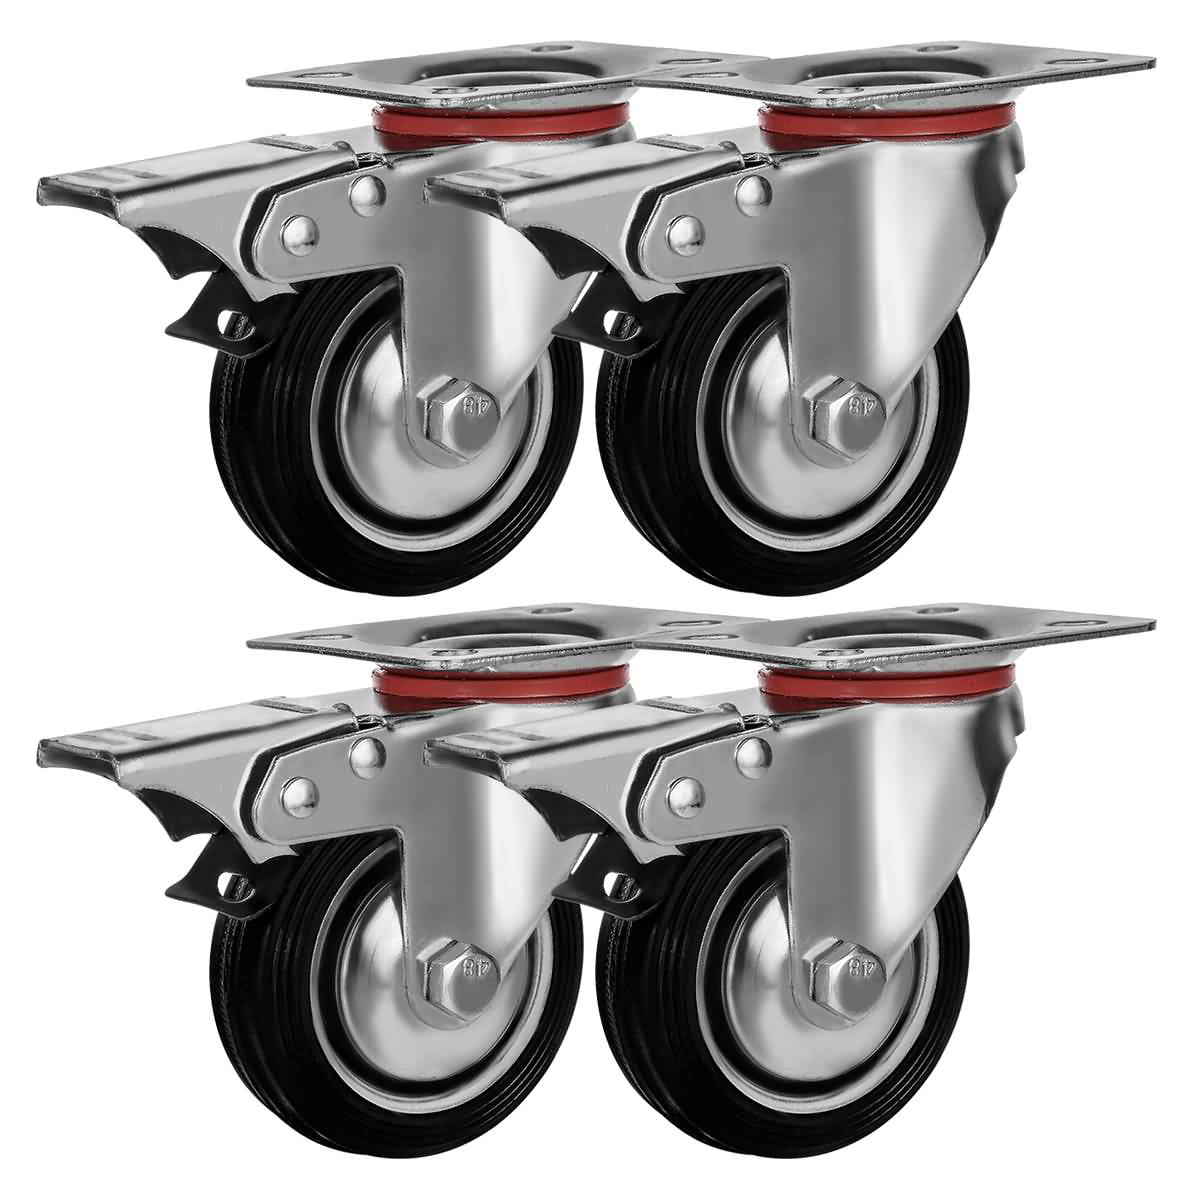 Universal Swivel Wheels Heavy Duty Casters For Moving Furniture Chair Cabinet 